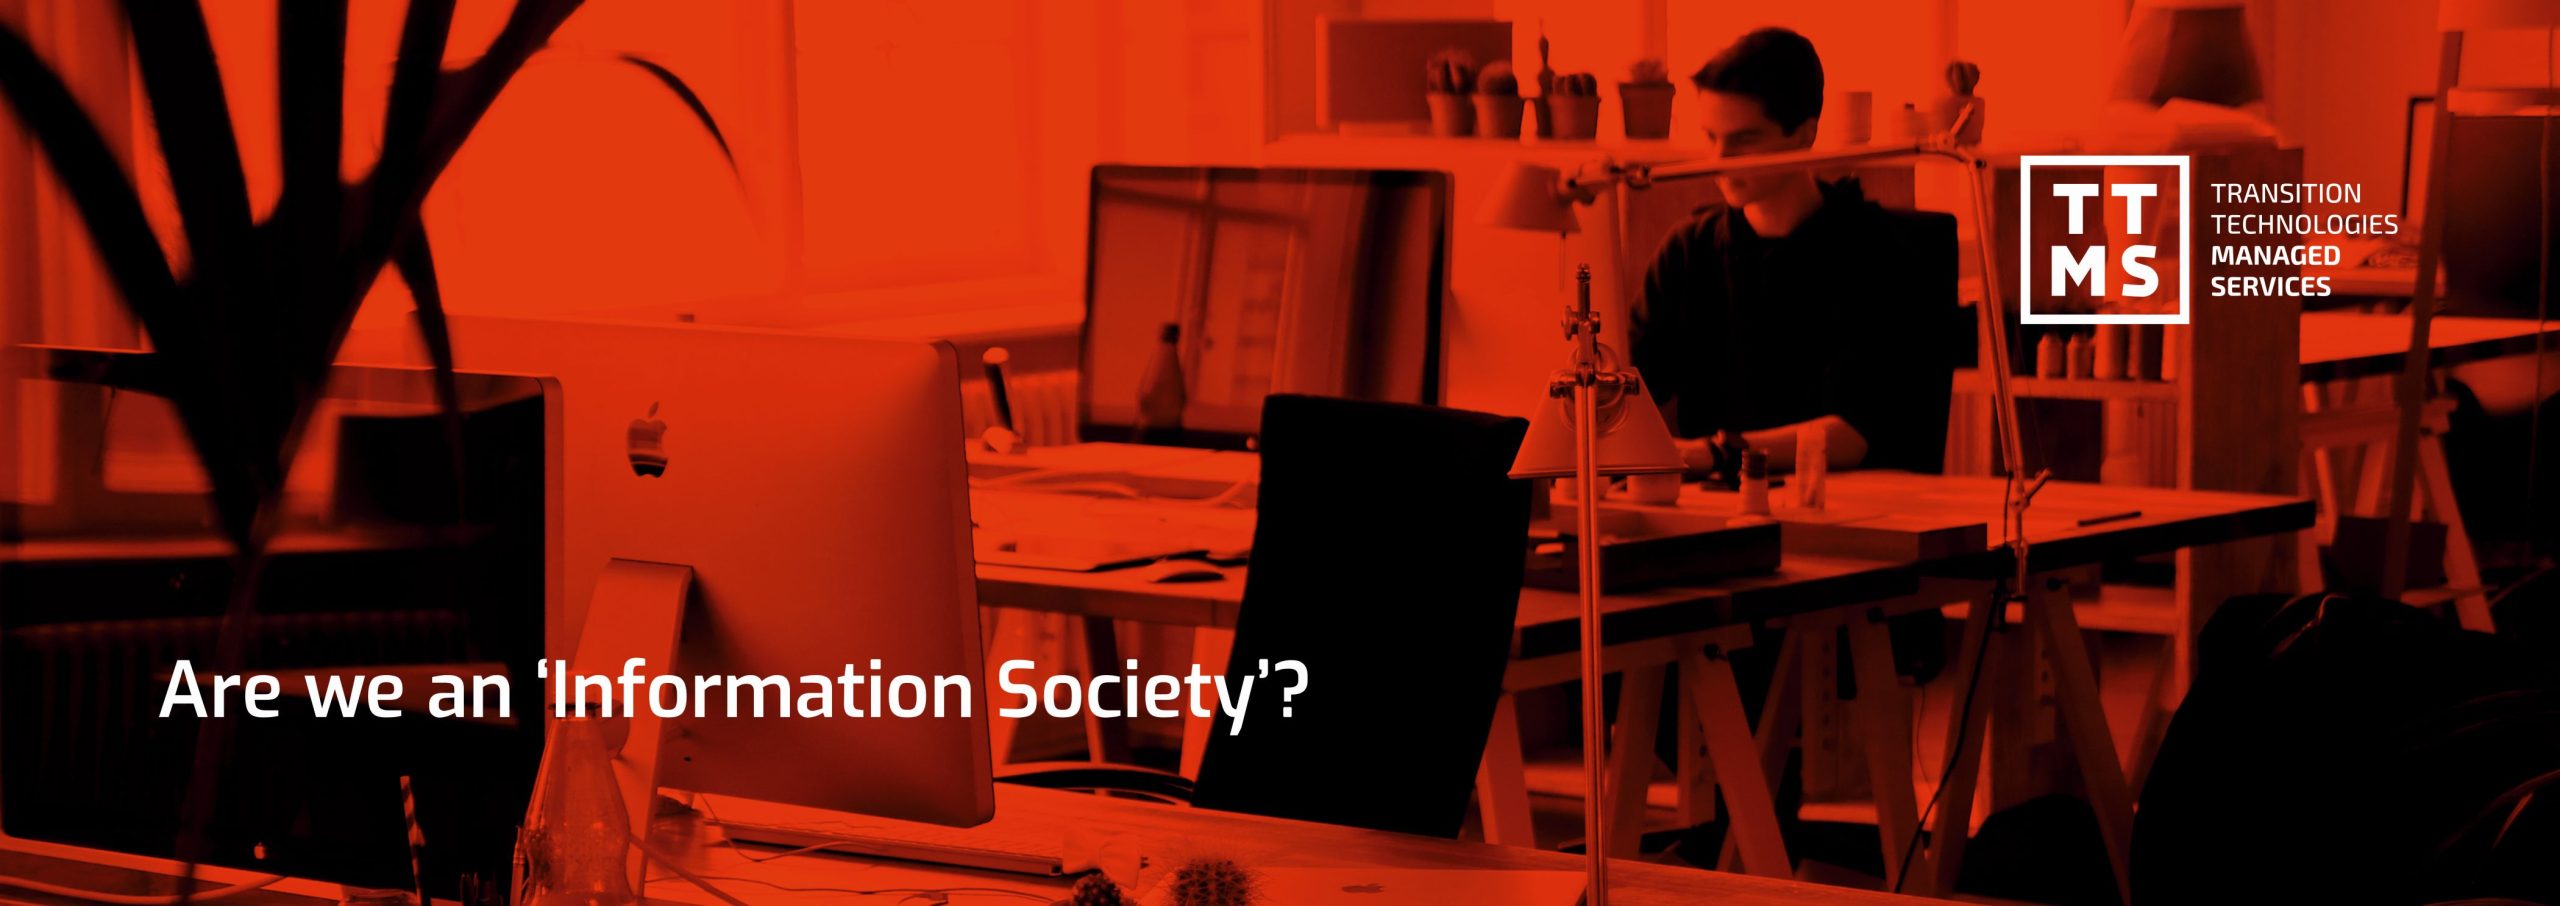 Are we an ‘Information Society’?